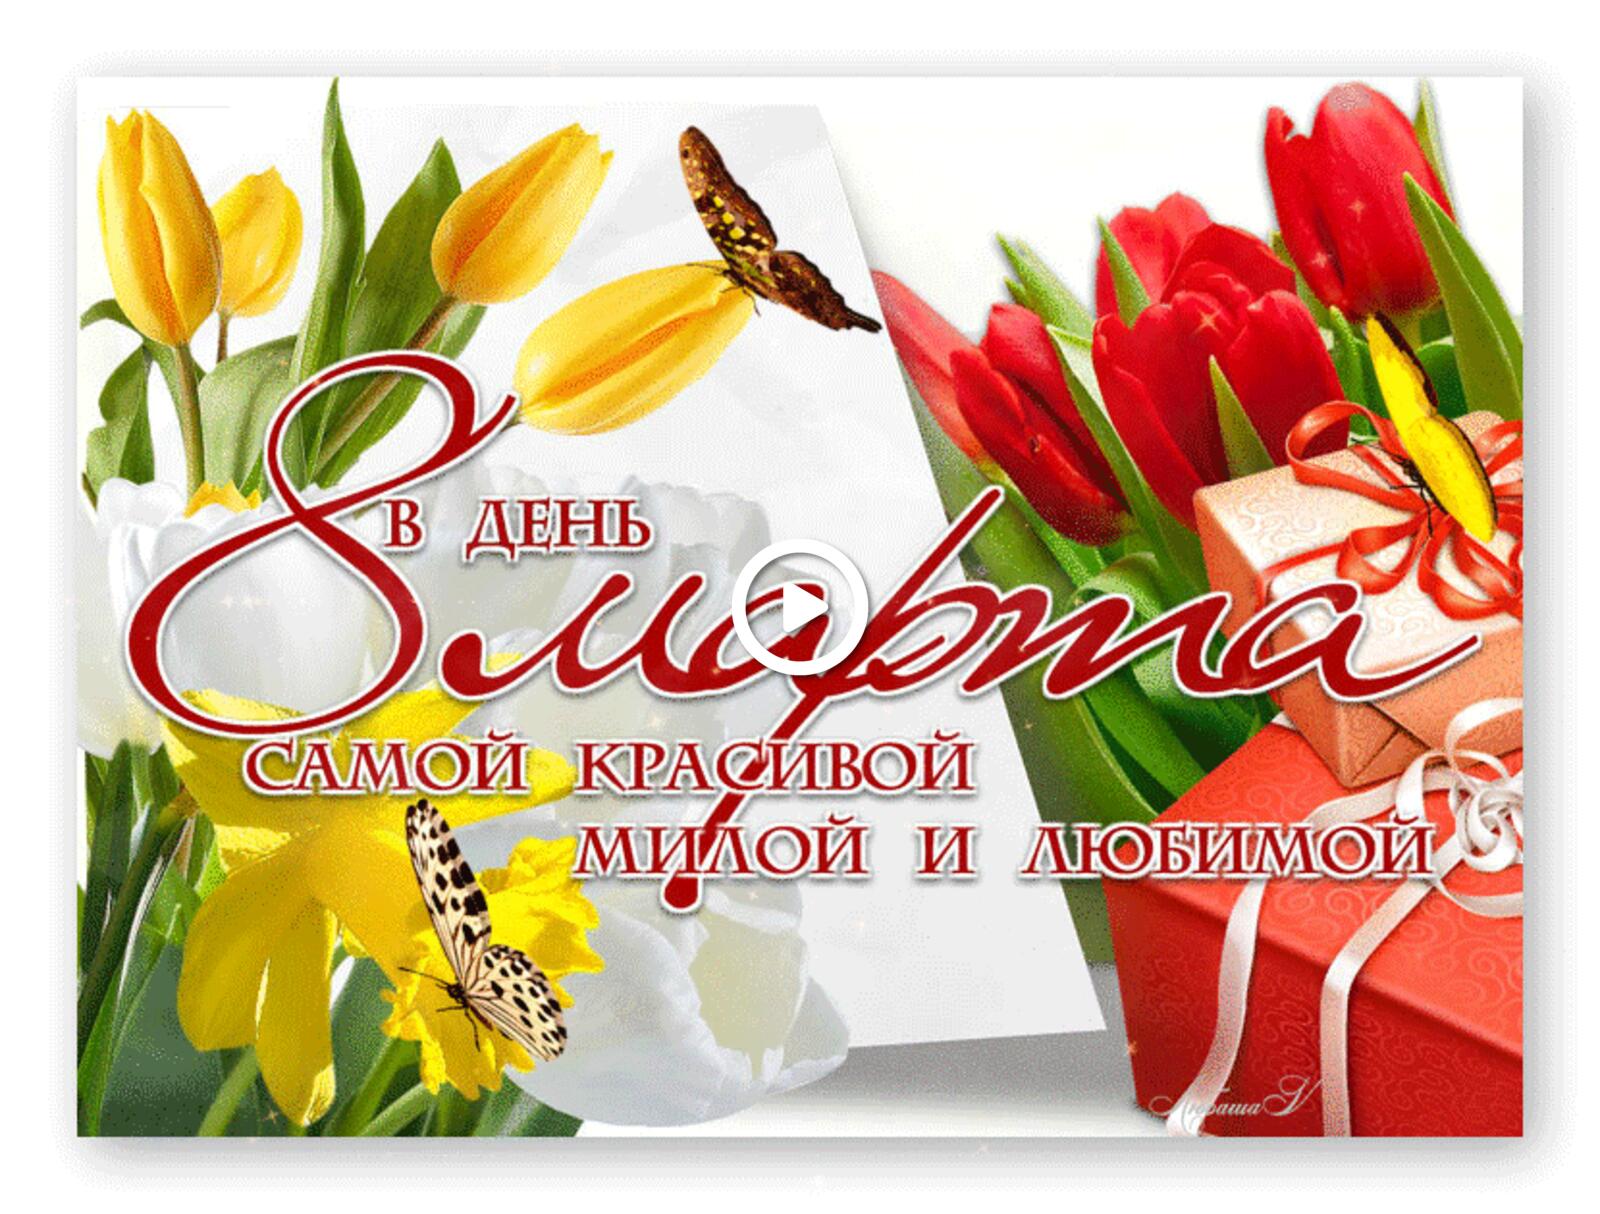 Free postcard To the most beautiful sweetheart on March 8th.